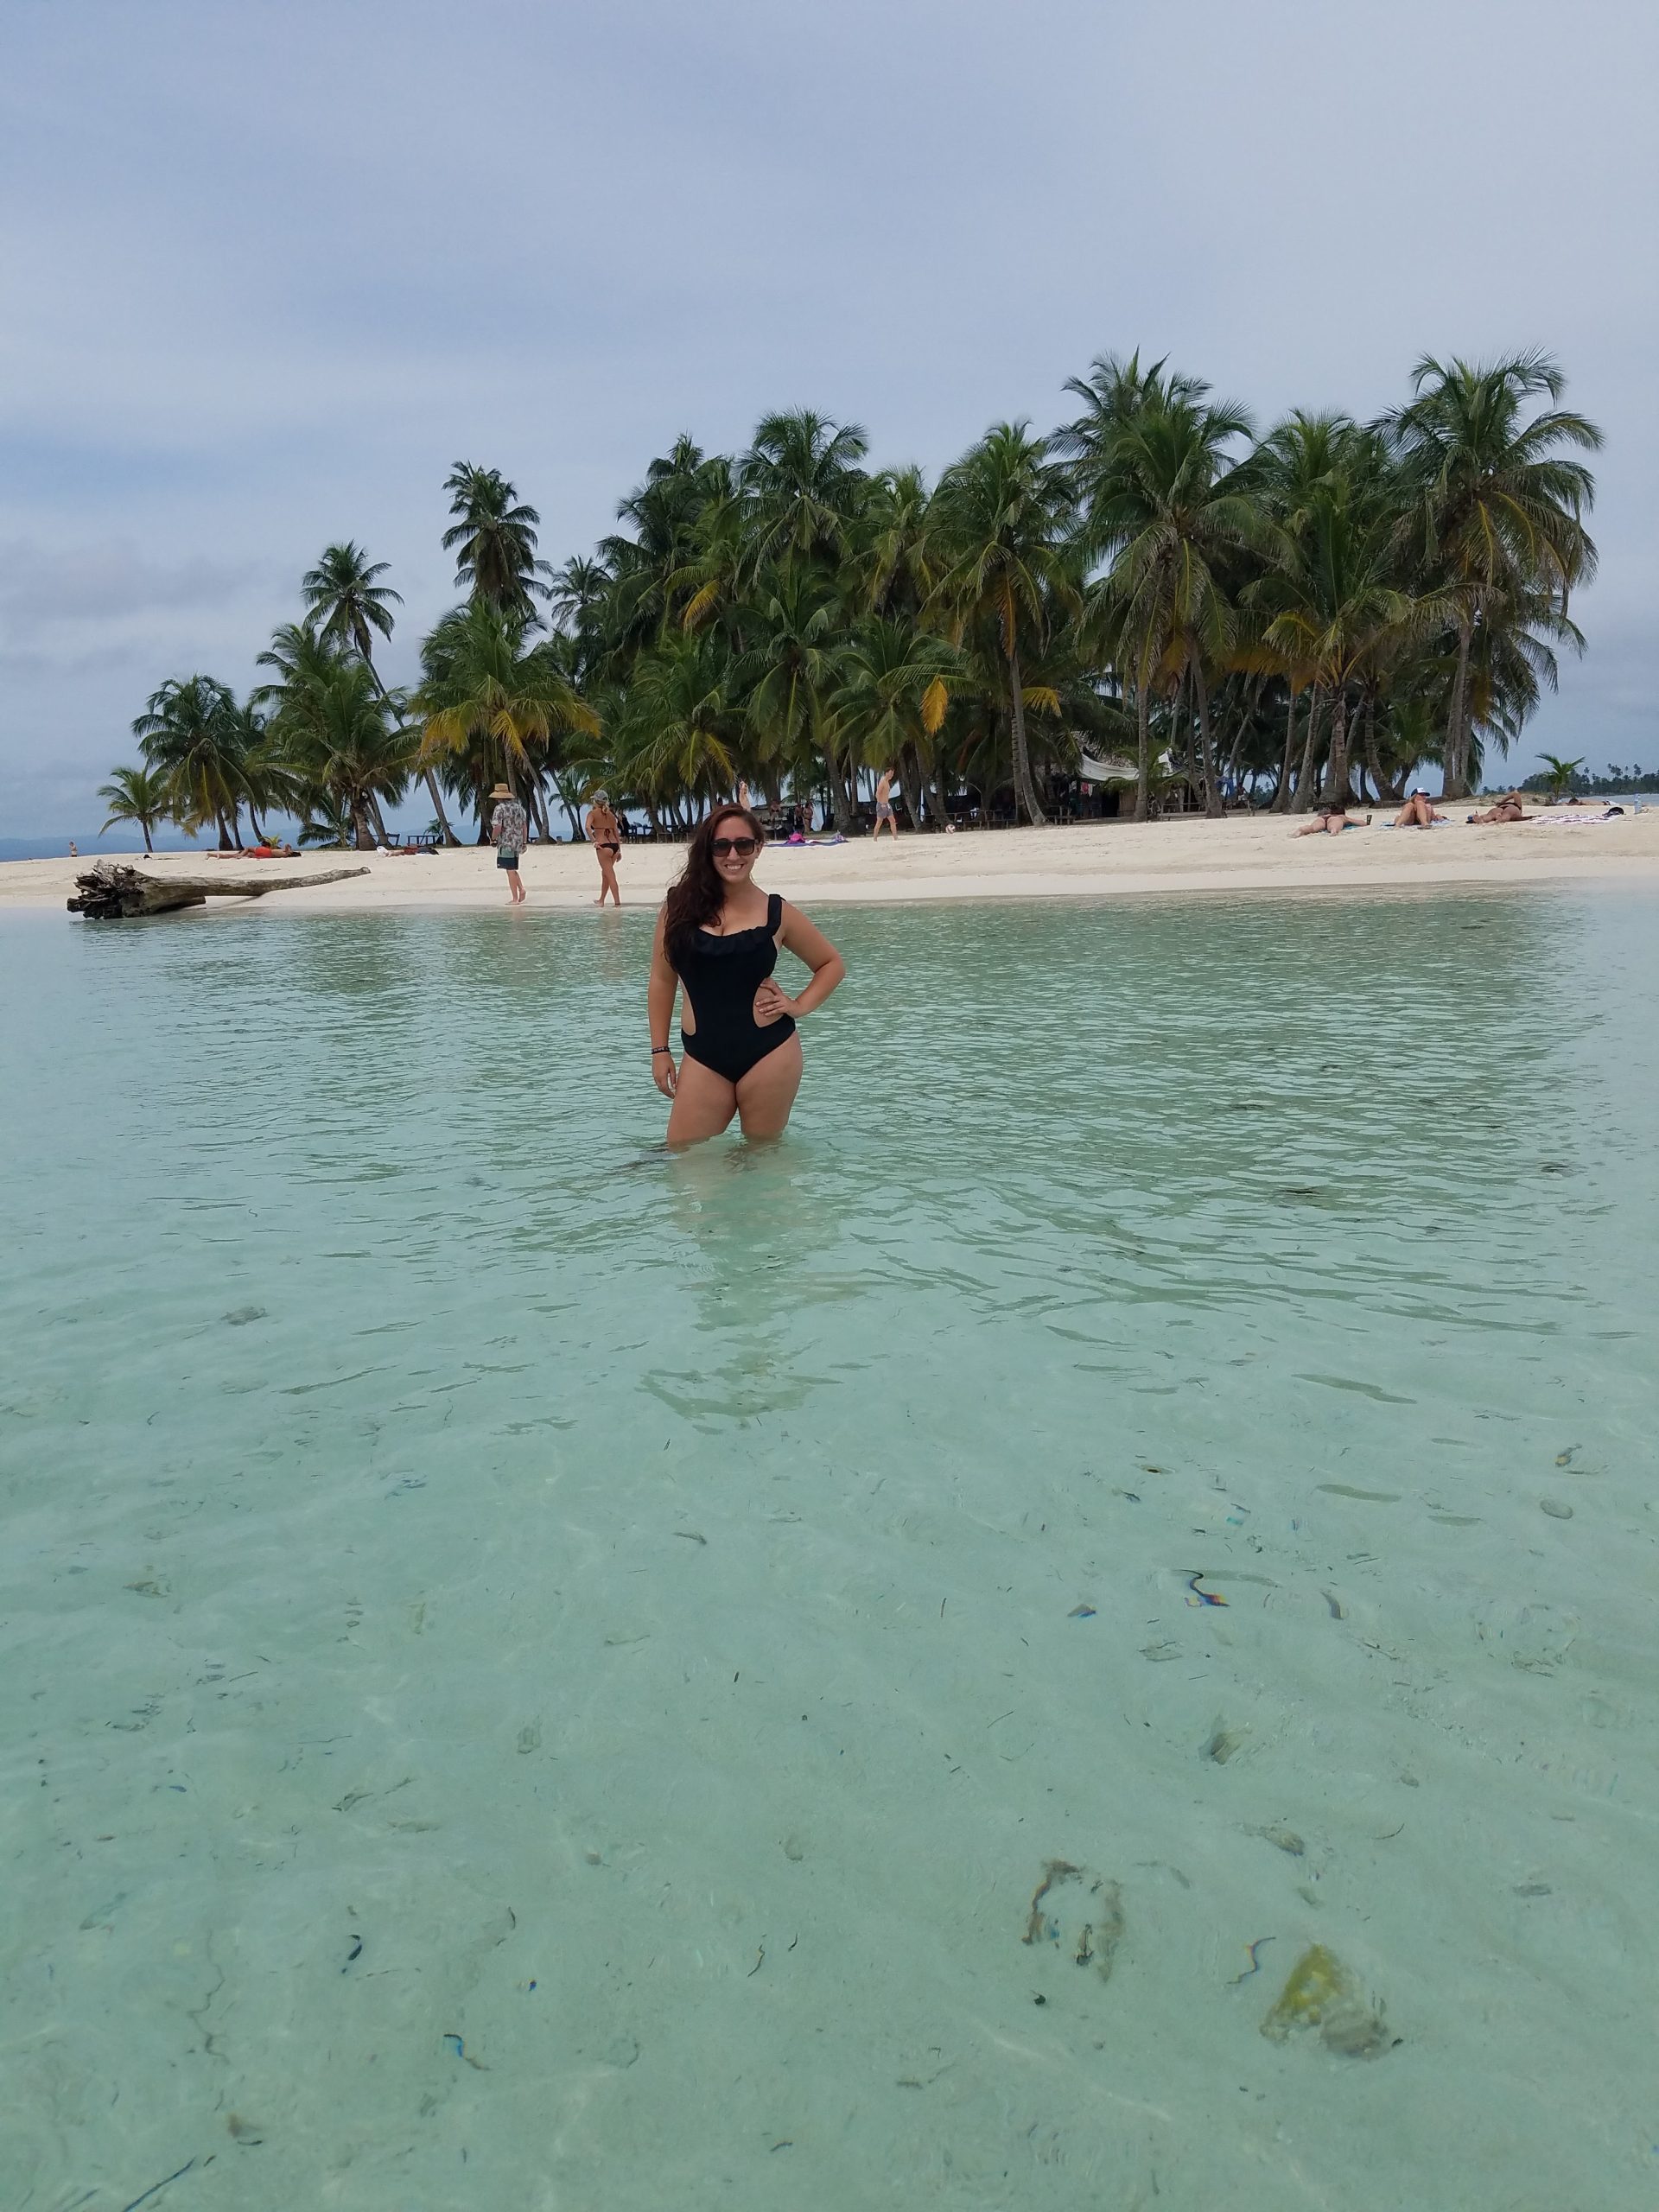 A woman standing in the water against a backdrop of an island full of palm trees